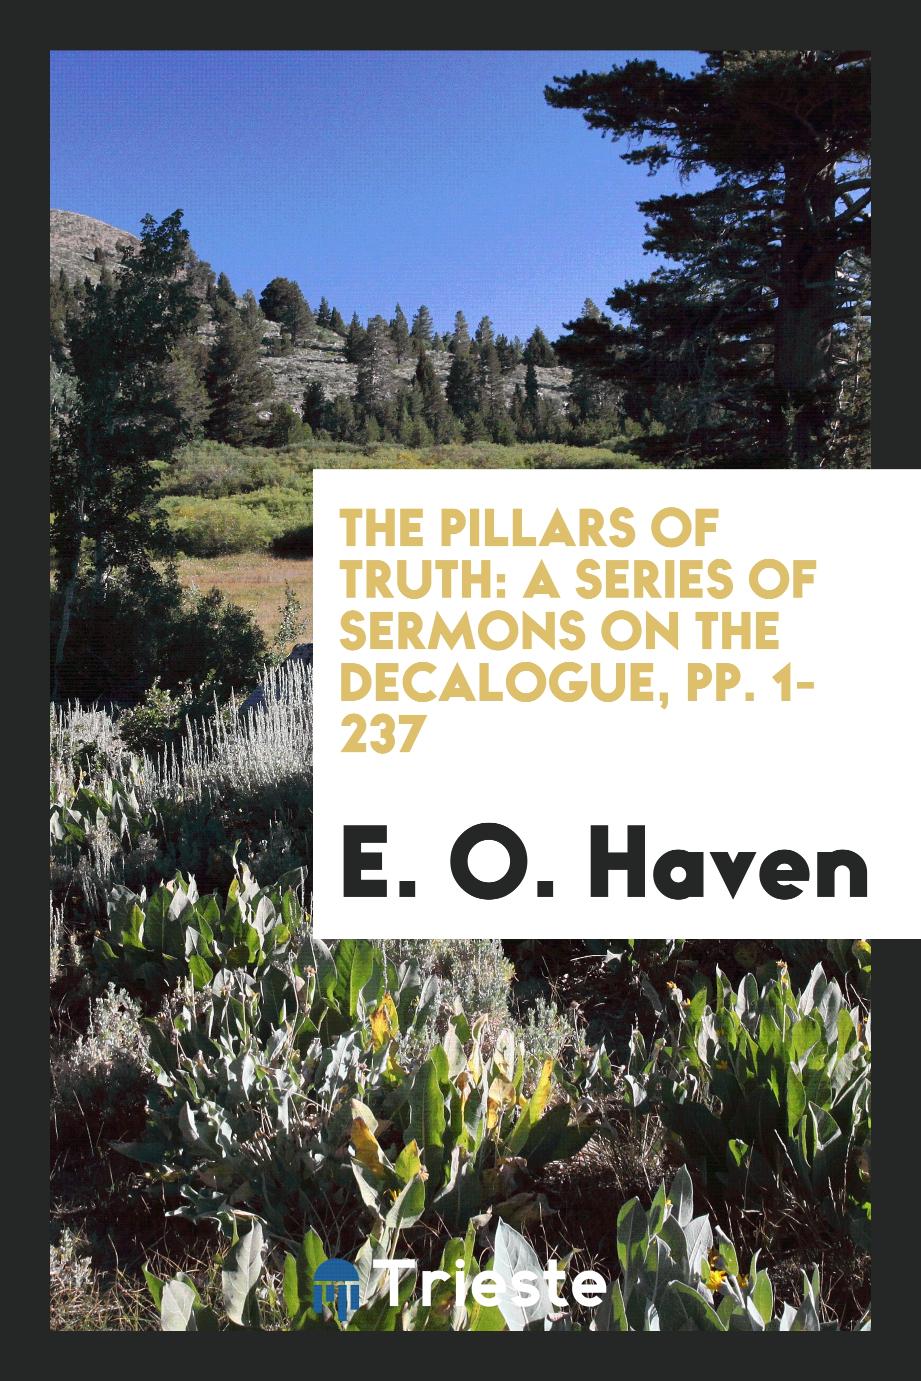 The Pillars of Truth: A Series of Sermons on the Decalogue, pp. 1-237